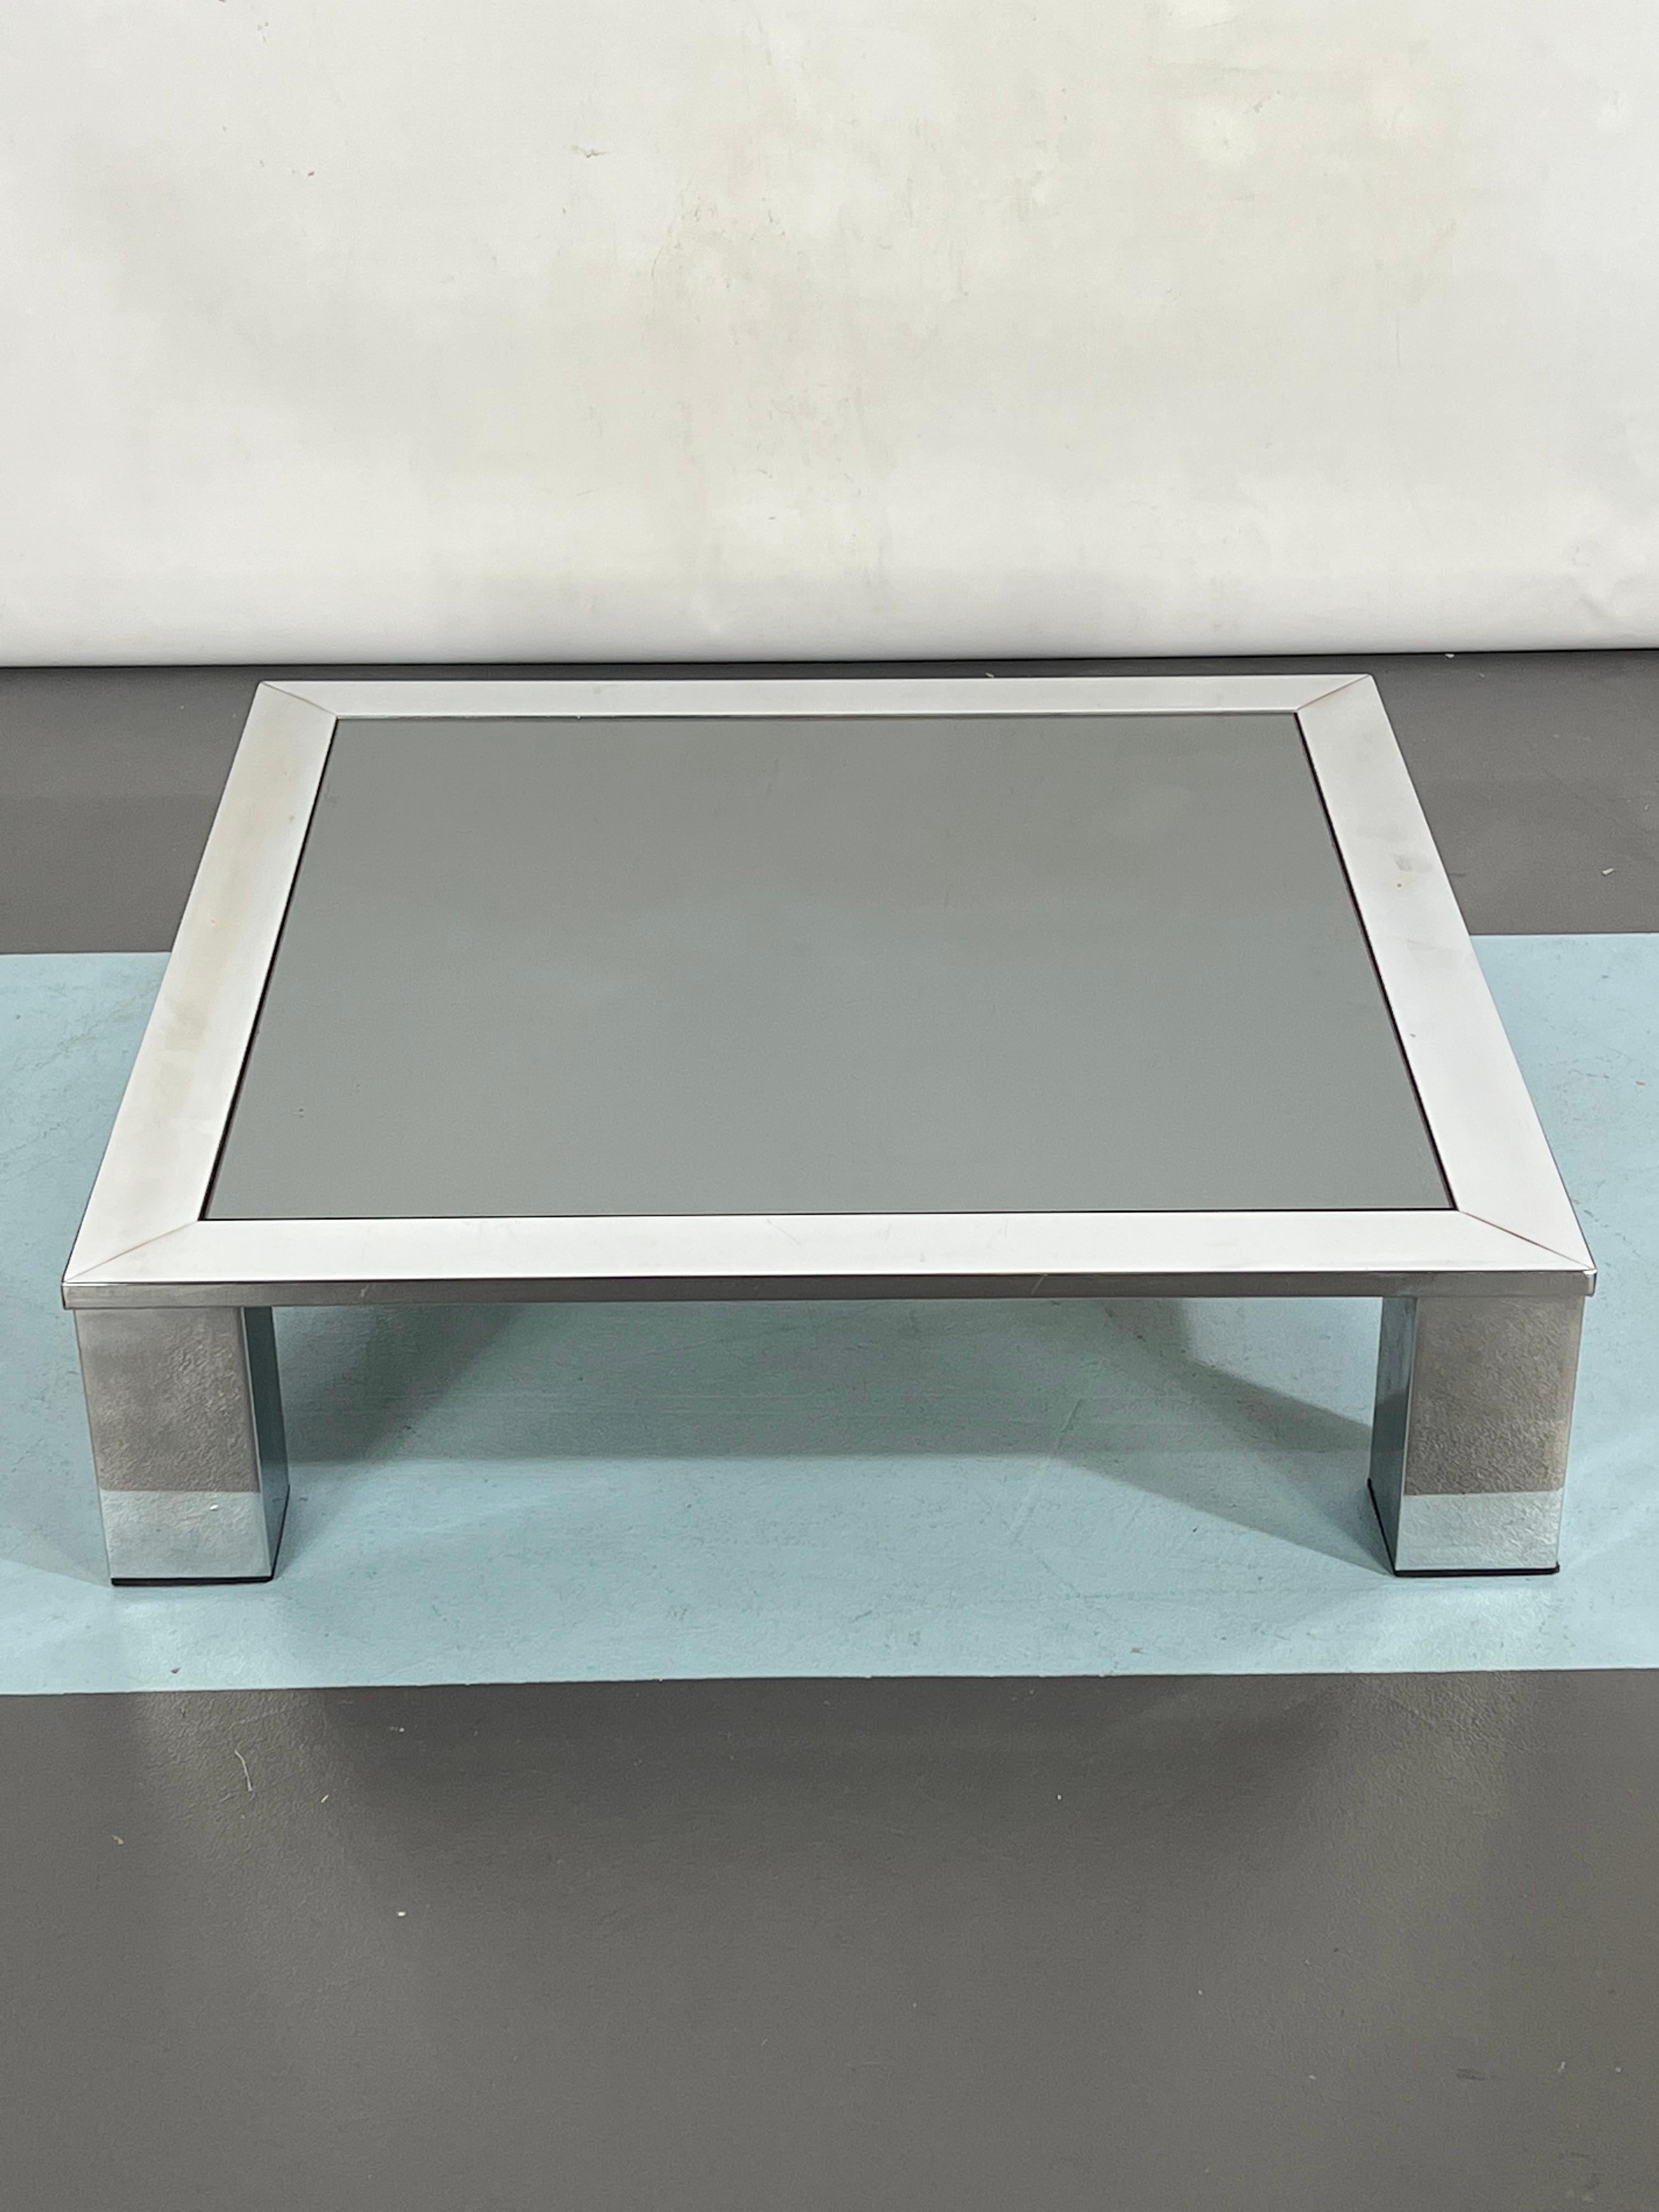 Great vintage condition with normal trace of age and use for this side table produced in Italy during the 70s and made from chrome and dark mirror glass.